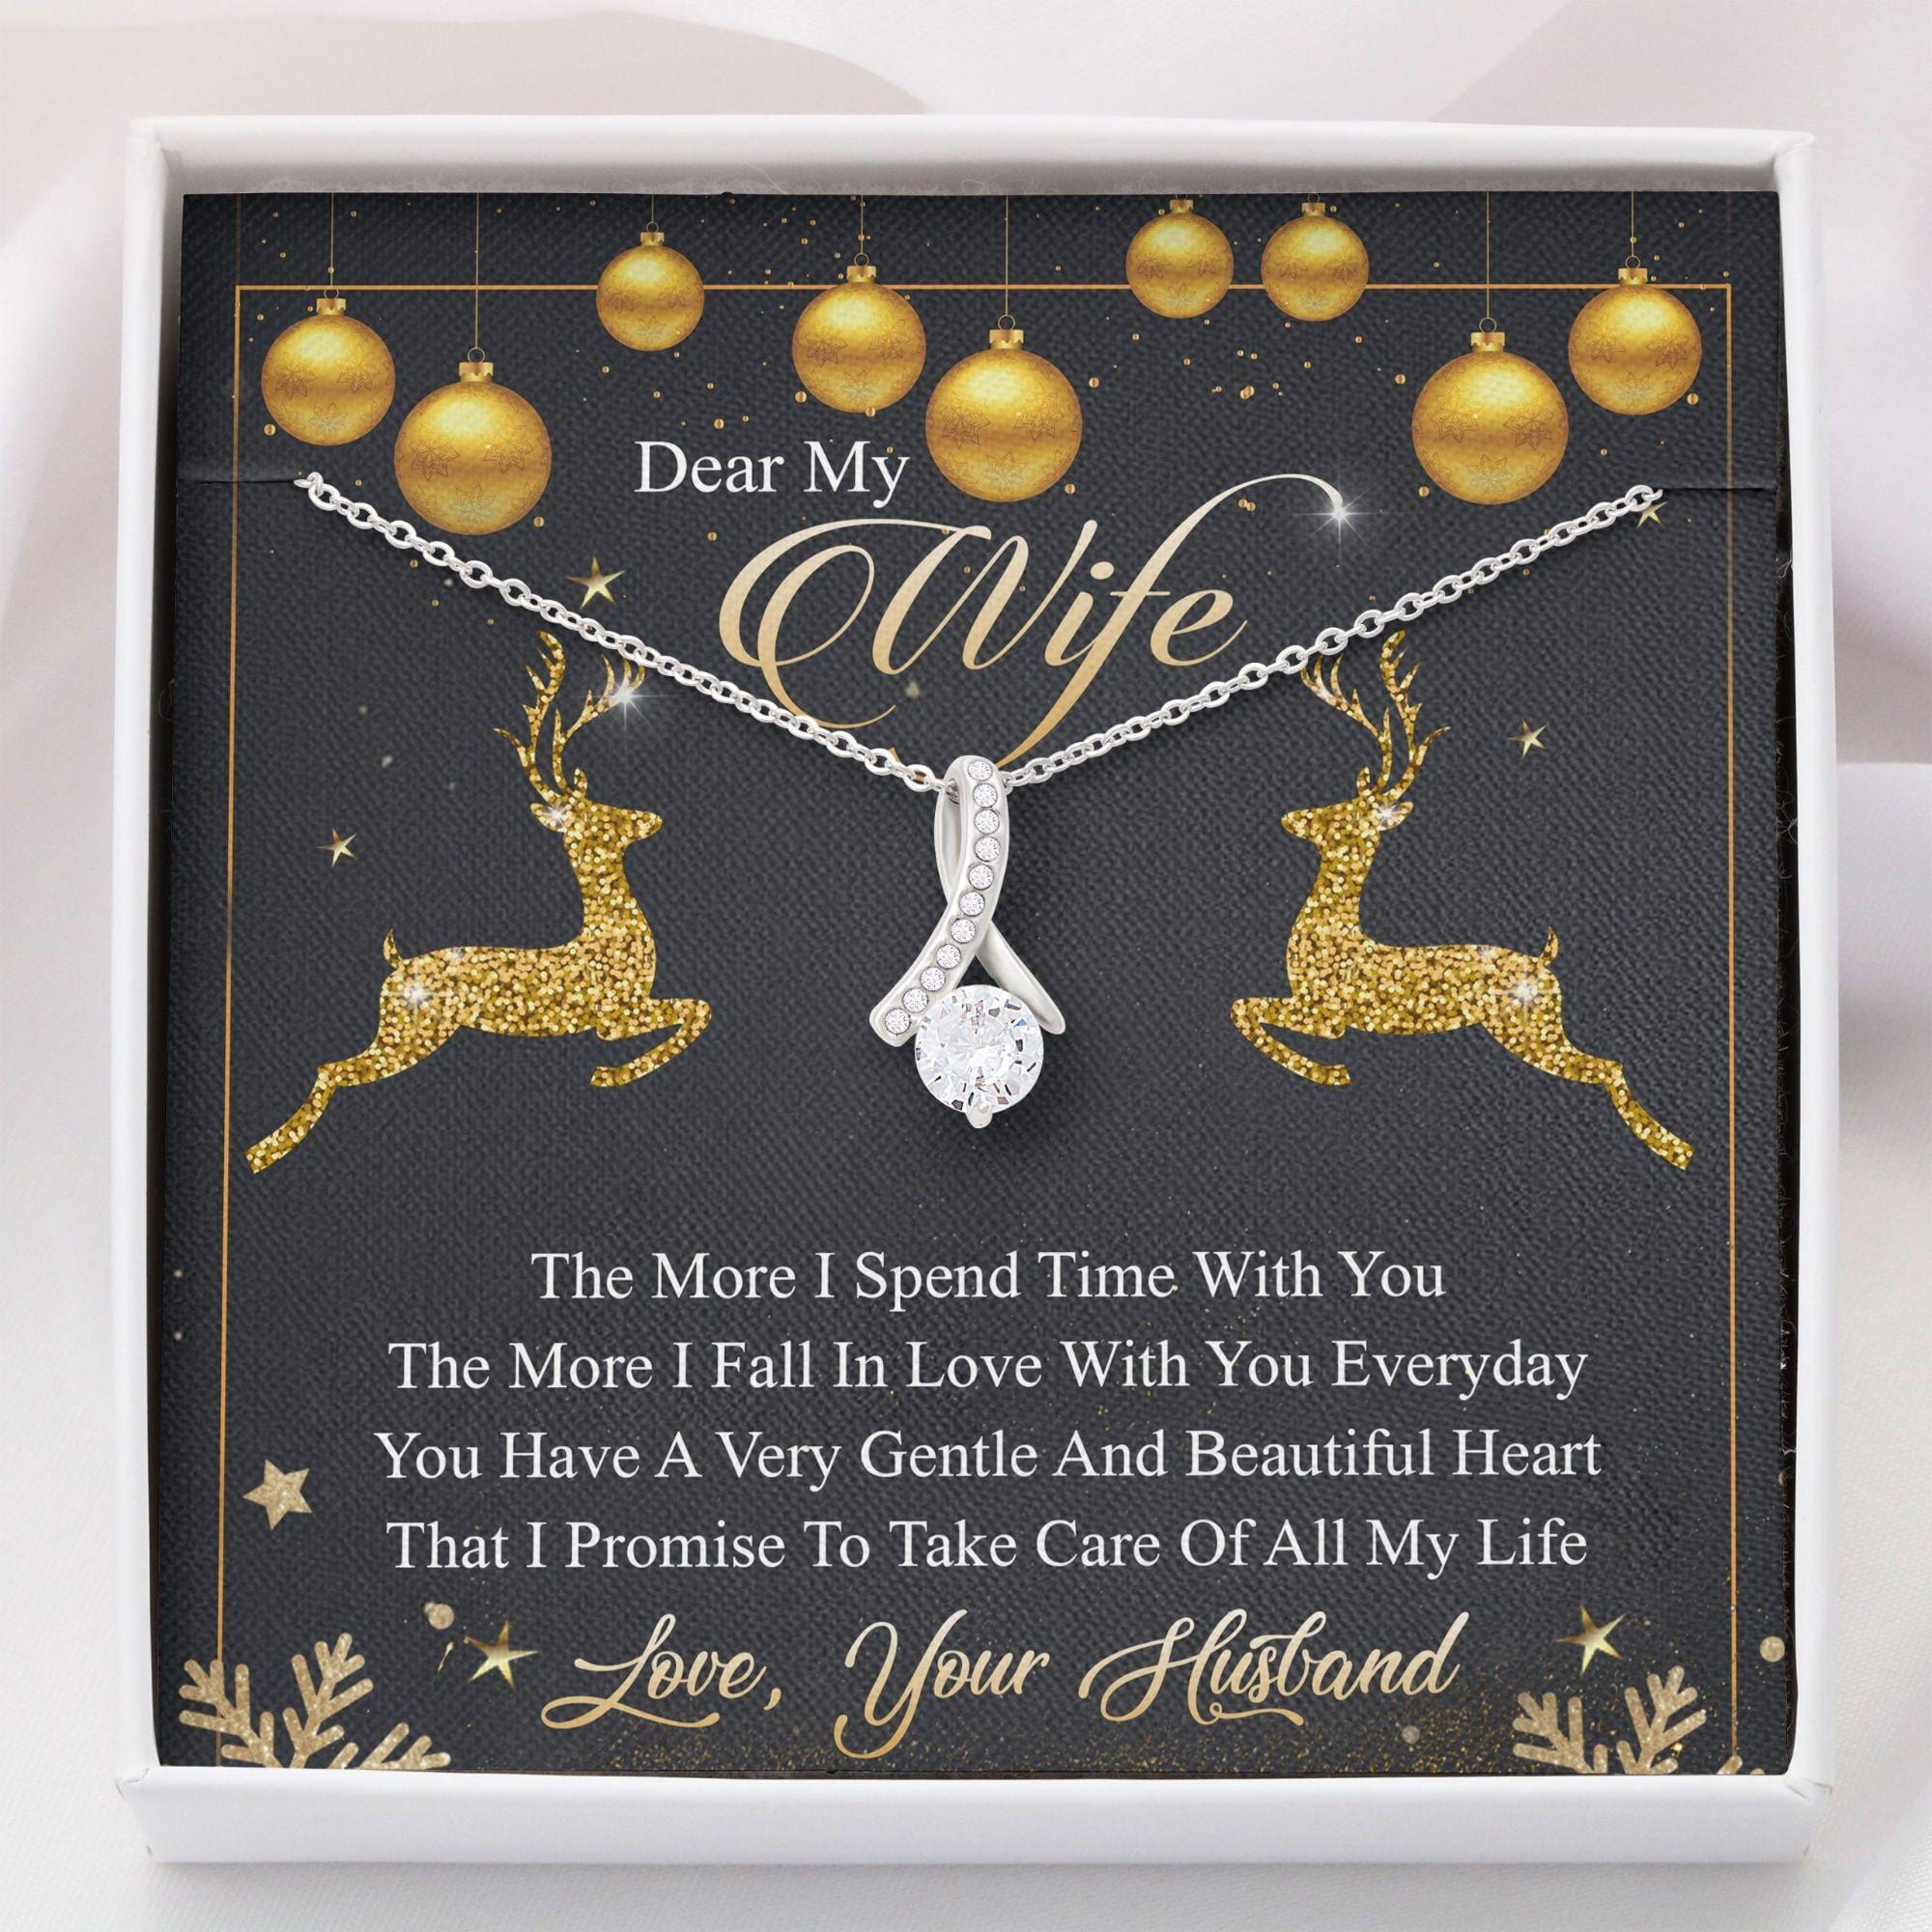 Dear My Wife Christmas Necklace - You Have A Very Gentle And Beautiful Heart That I Promise To Take Care Of All My Life